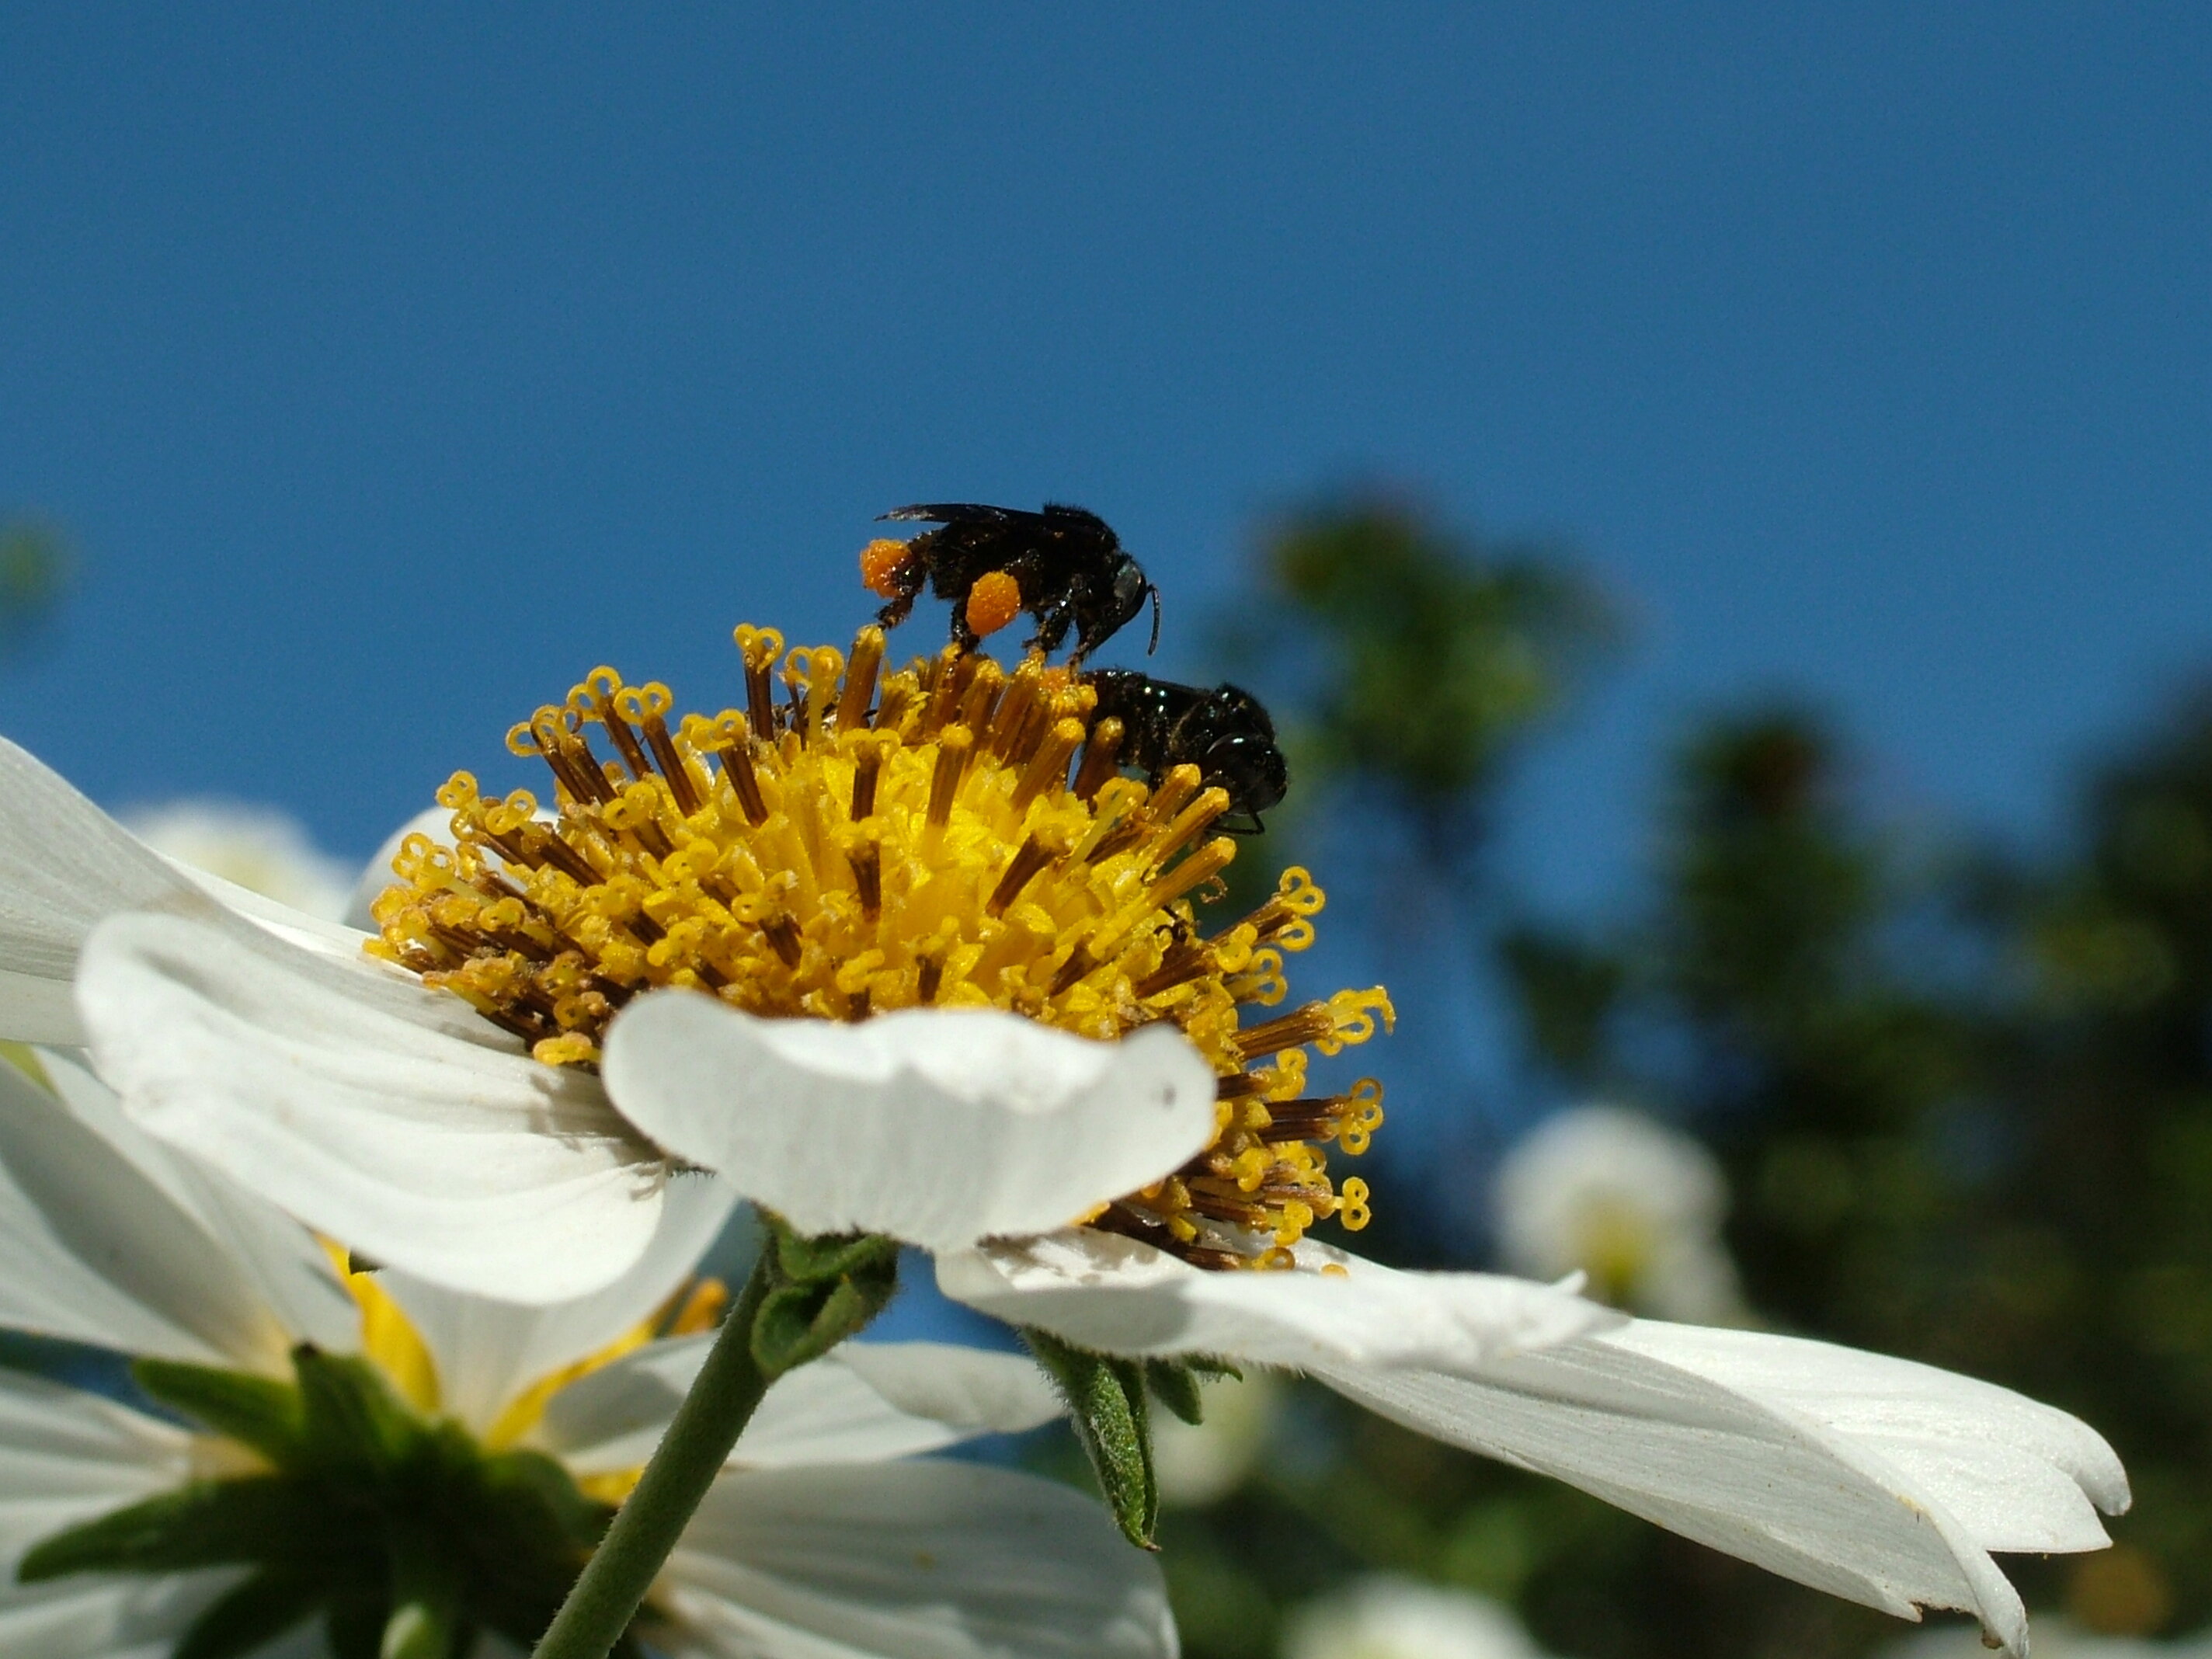 Scientists discover that human elements impact bees’ communication abilities.